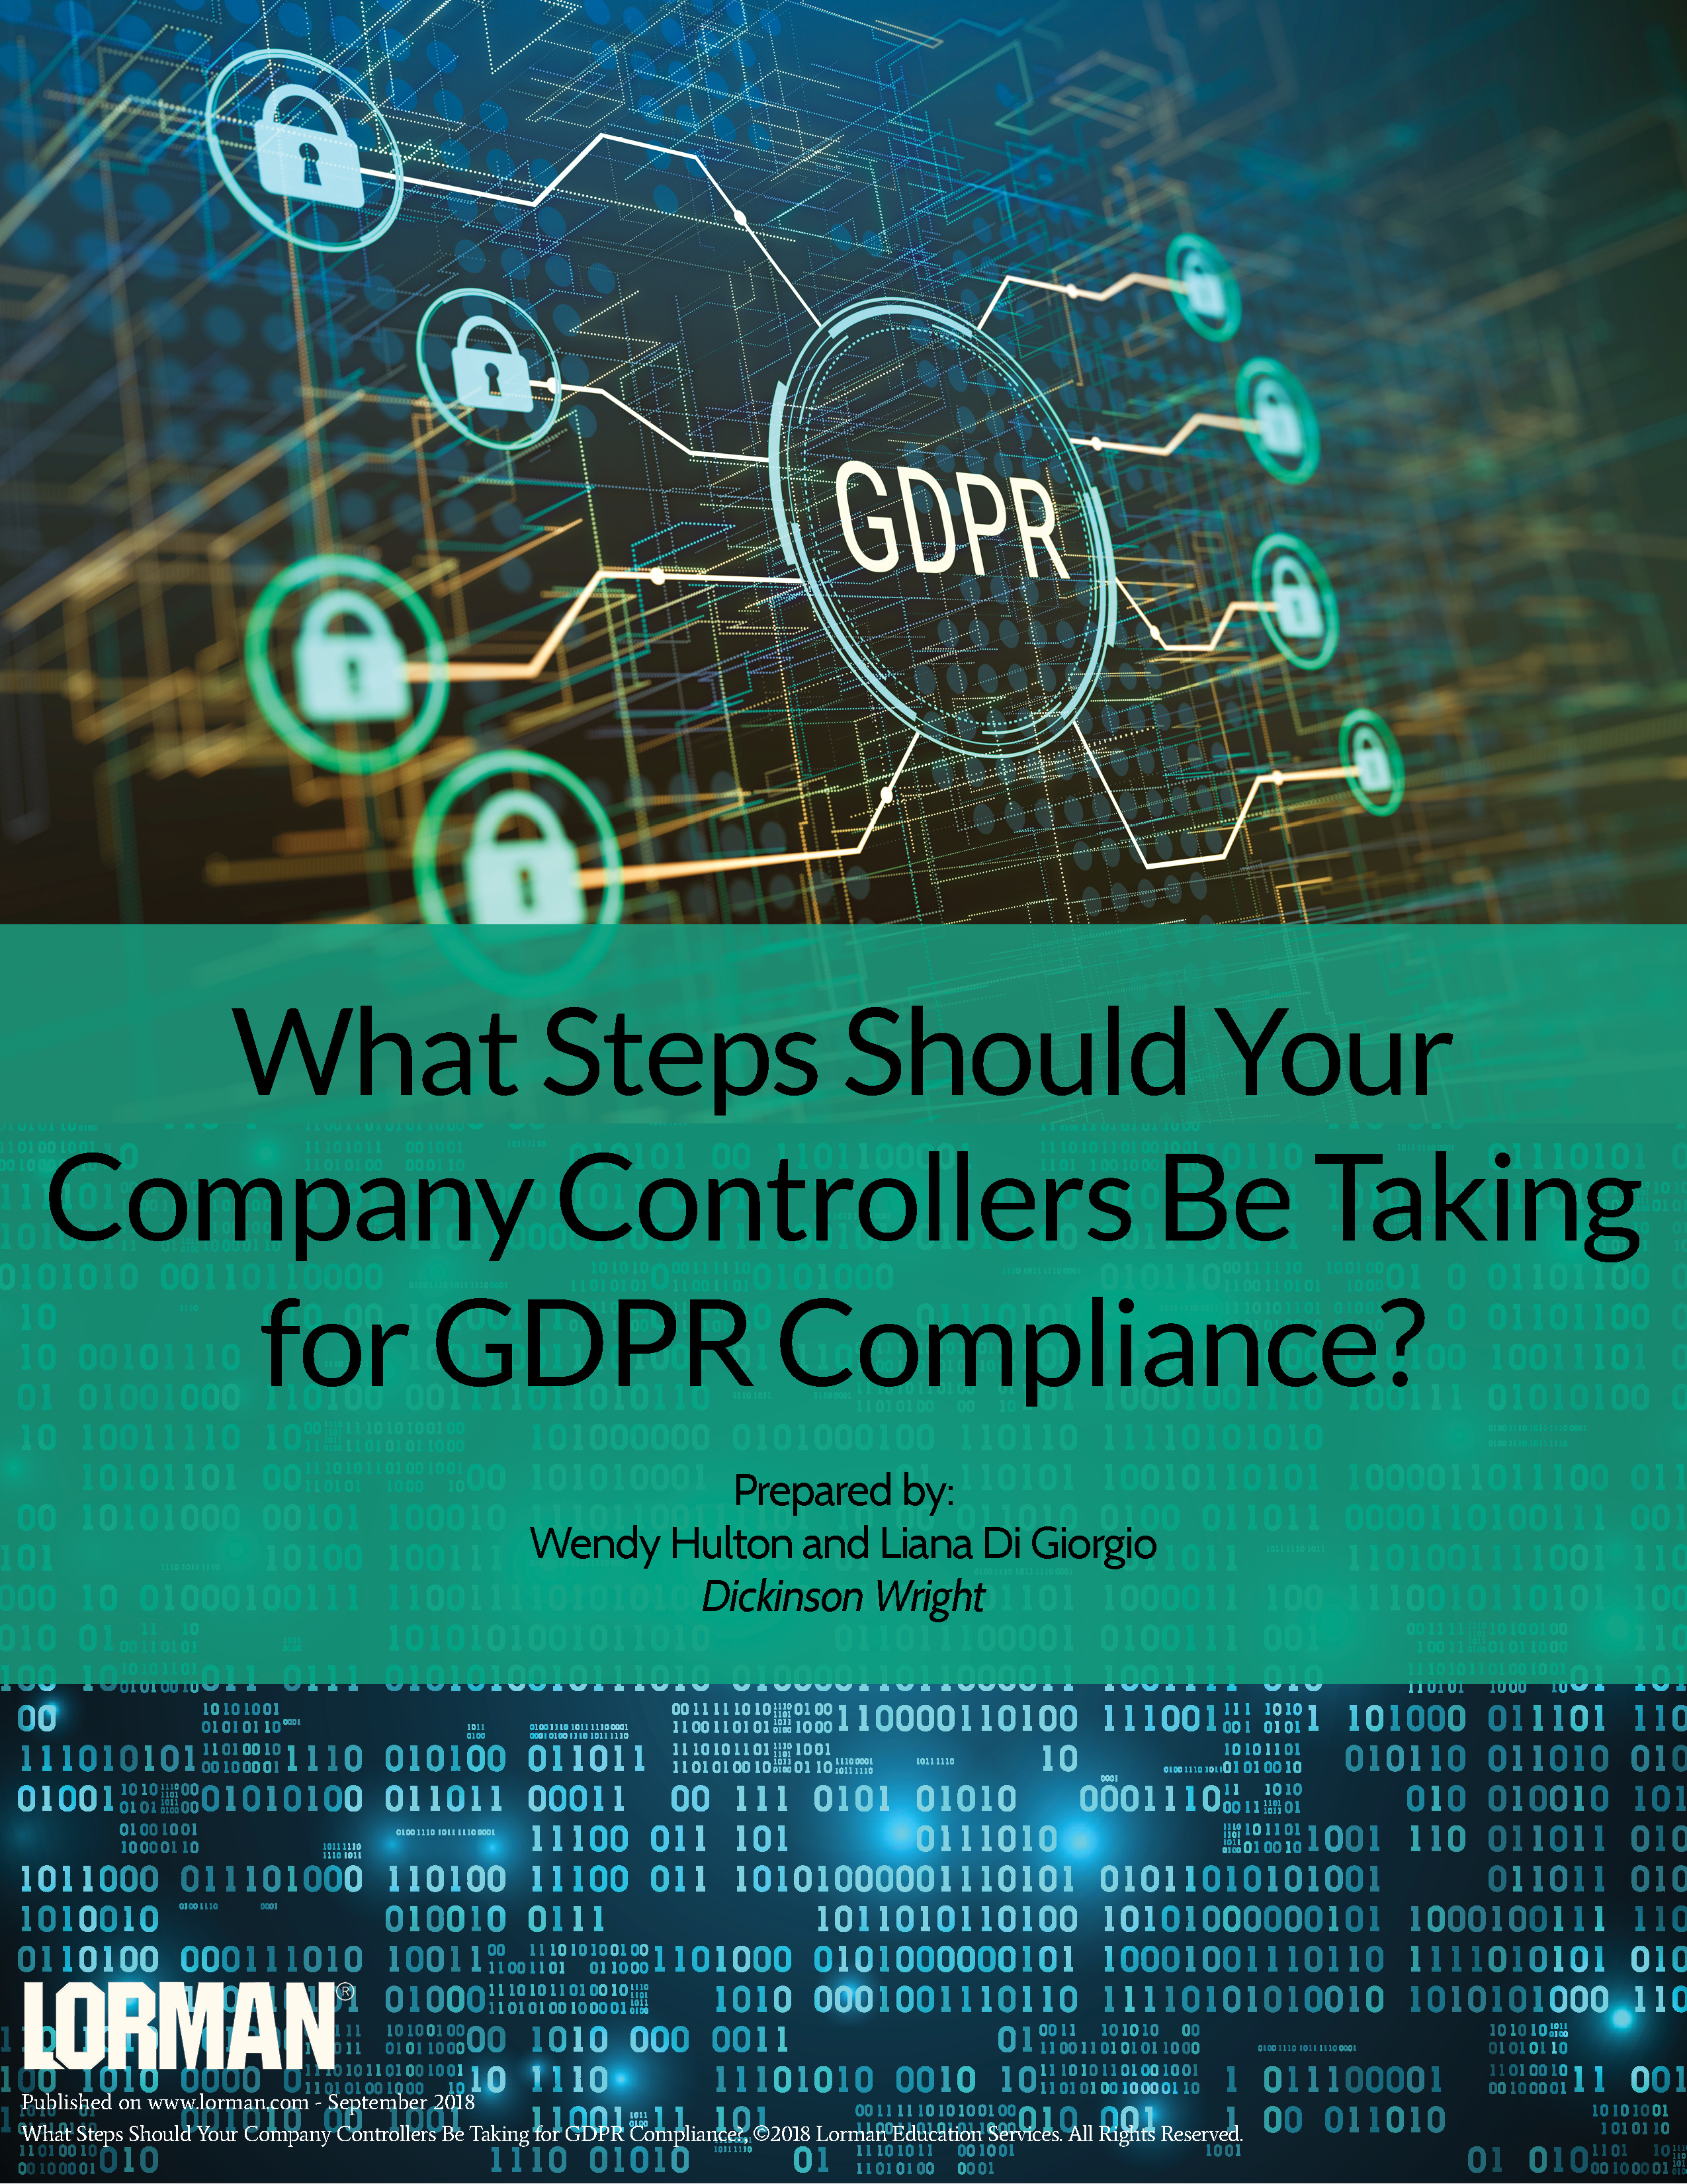 What Steps Should Your Company Controllers Be Taking for GDPR Compliance?